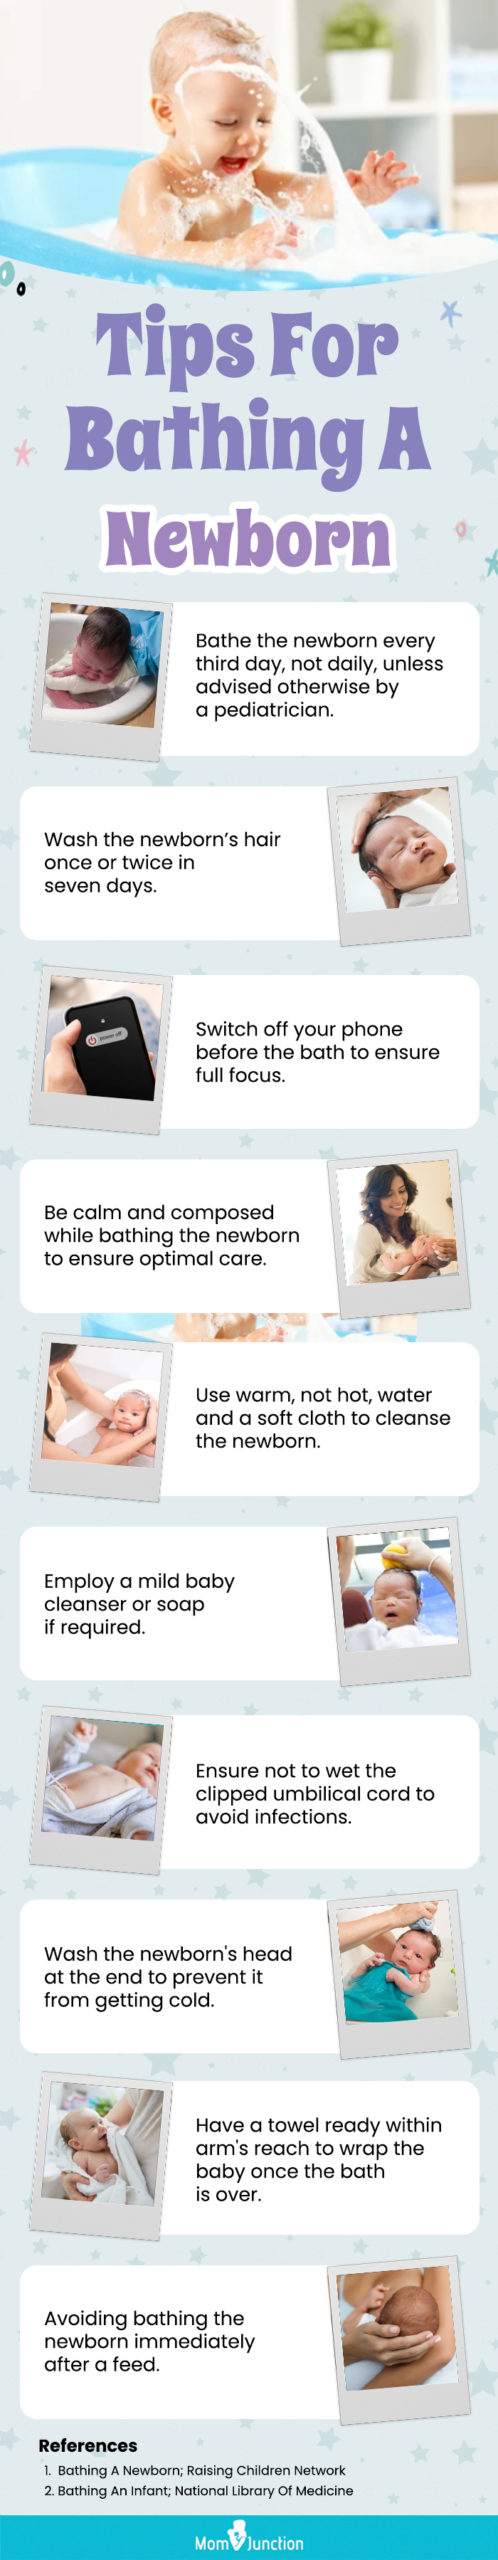 Tips For Bathing A Newborn (infographic)